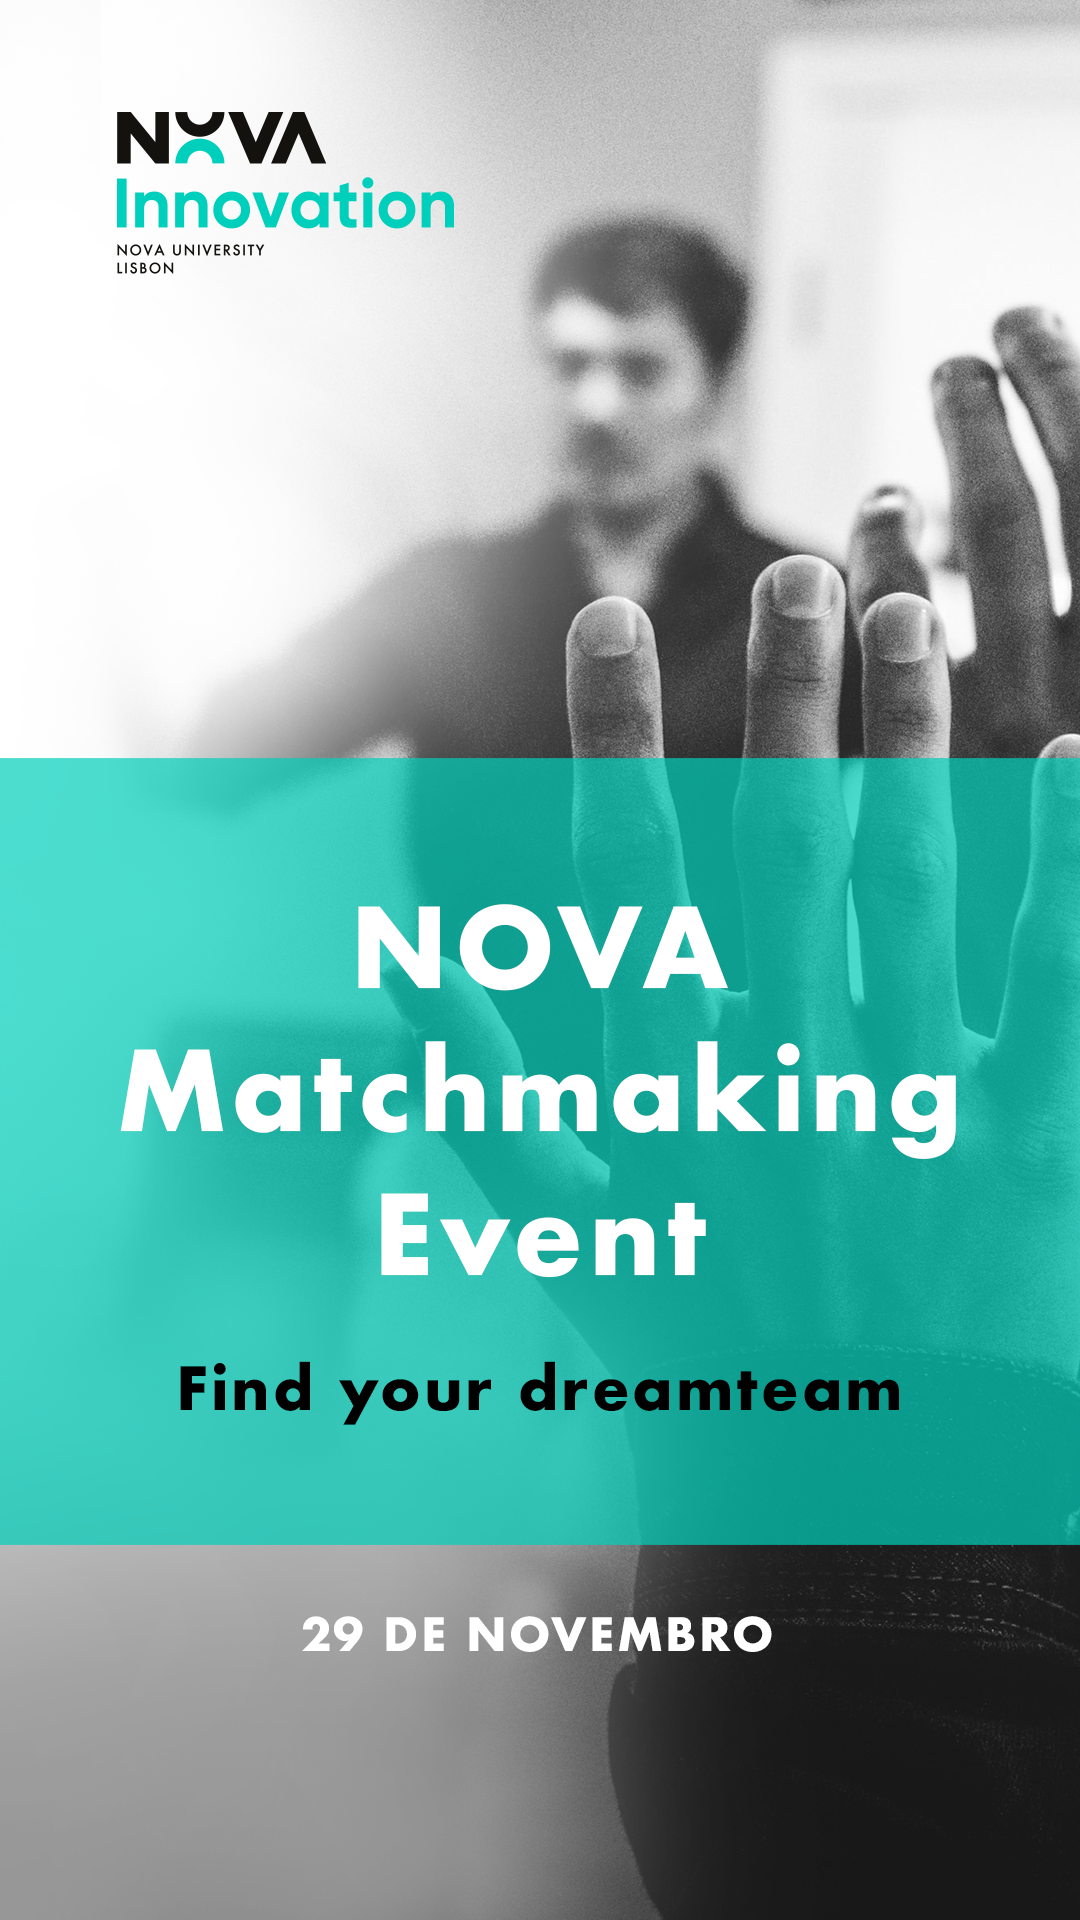 Matchmaking Event - Find your dream team!